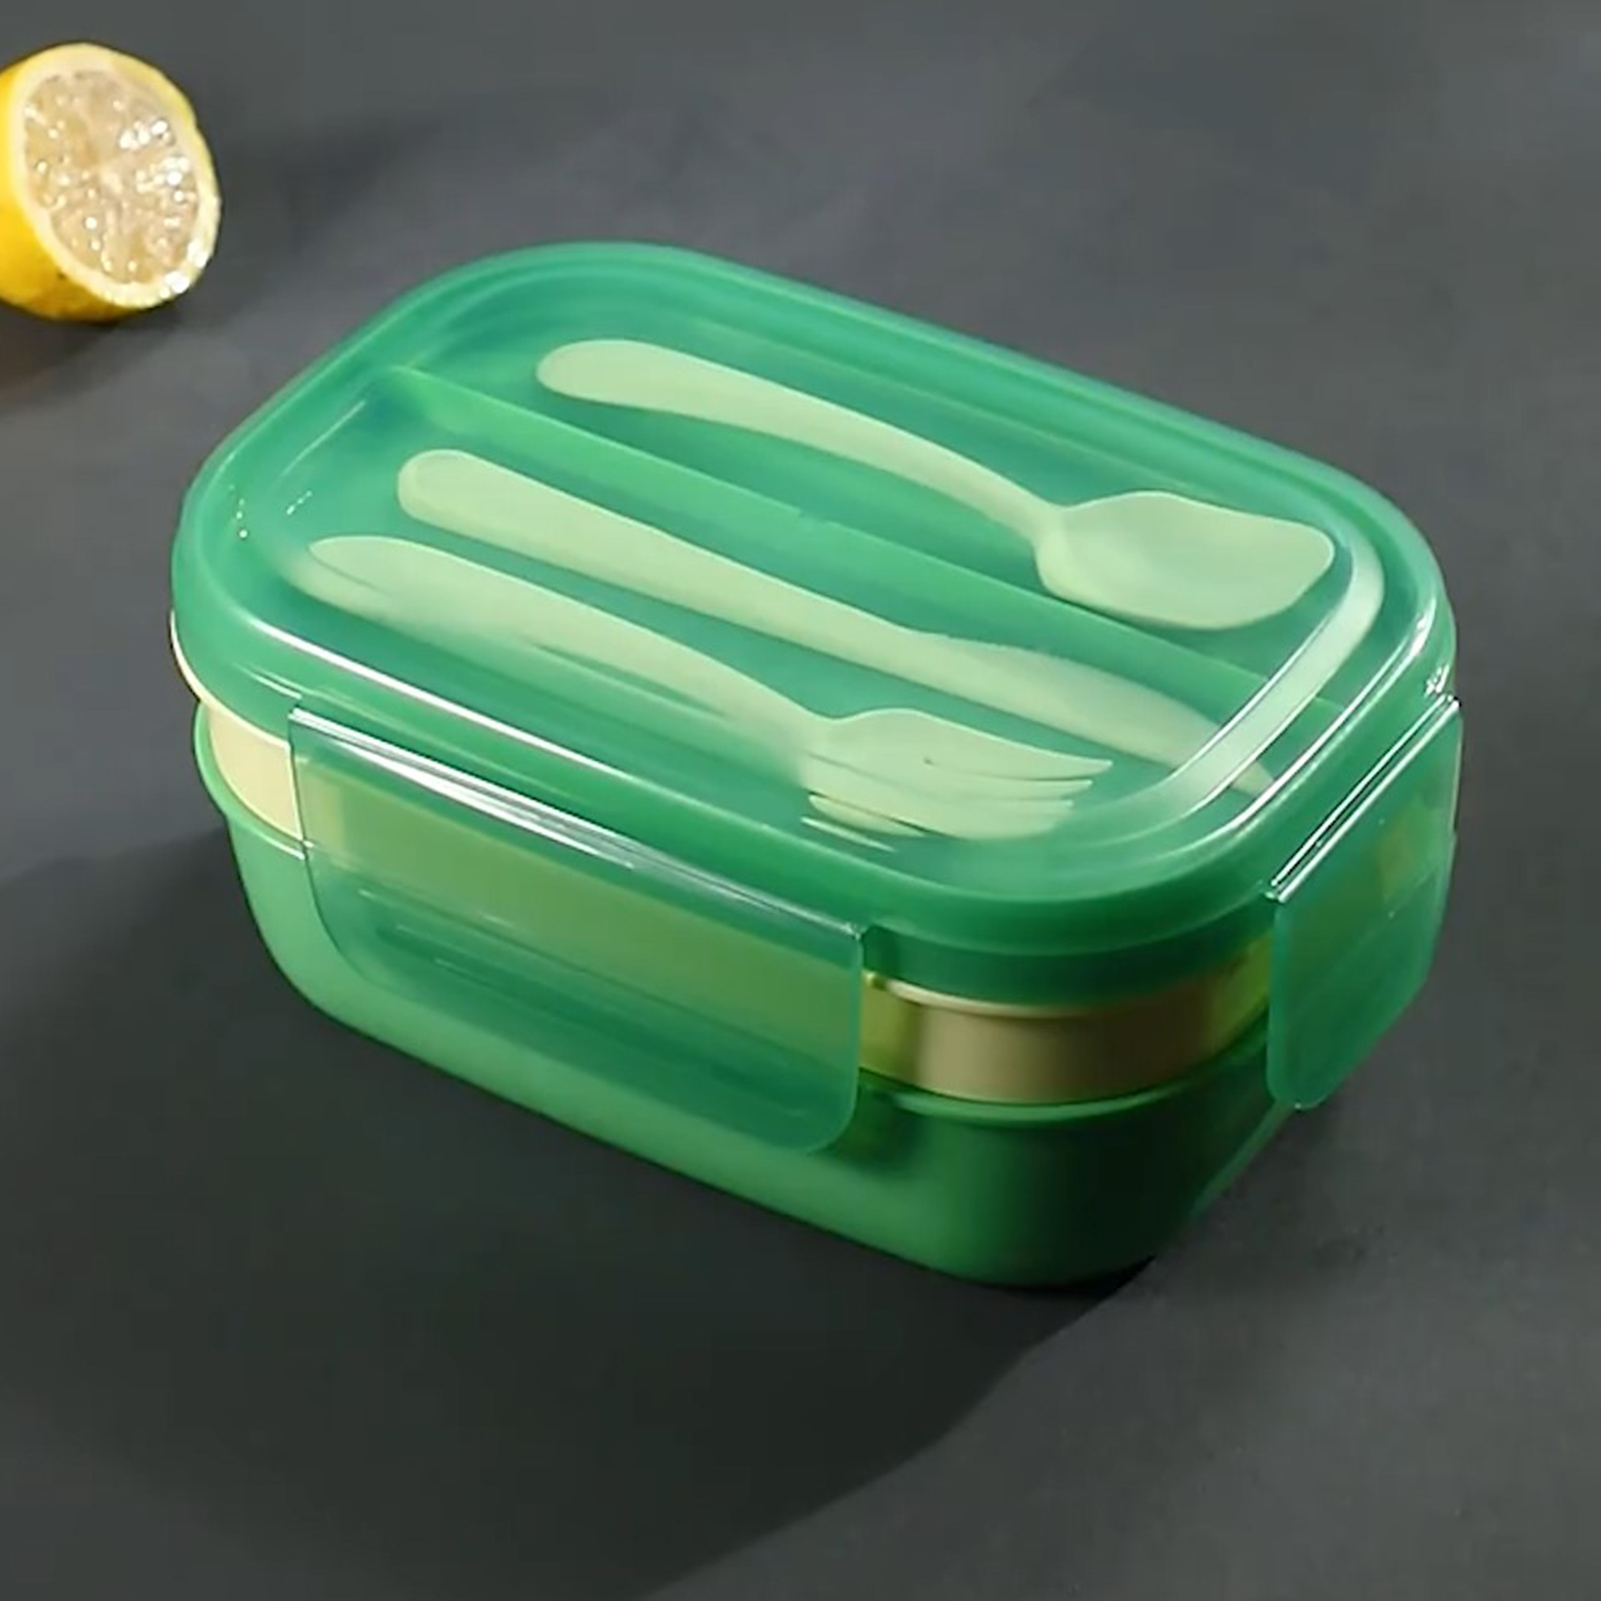 Lunch Container Good Sealing Compartment Large Capacity with Tableware 3 Layers Multiple Grid Lunch Food Box Daily Use, Adult Unisex, Green